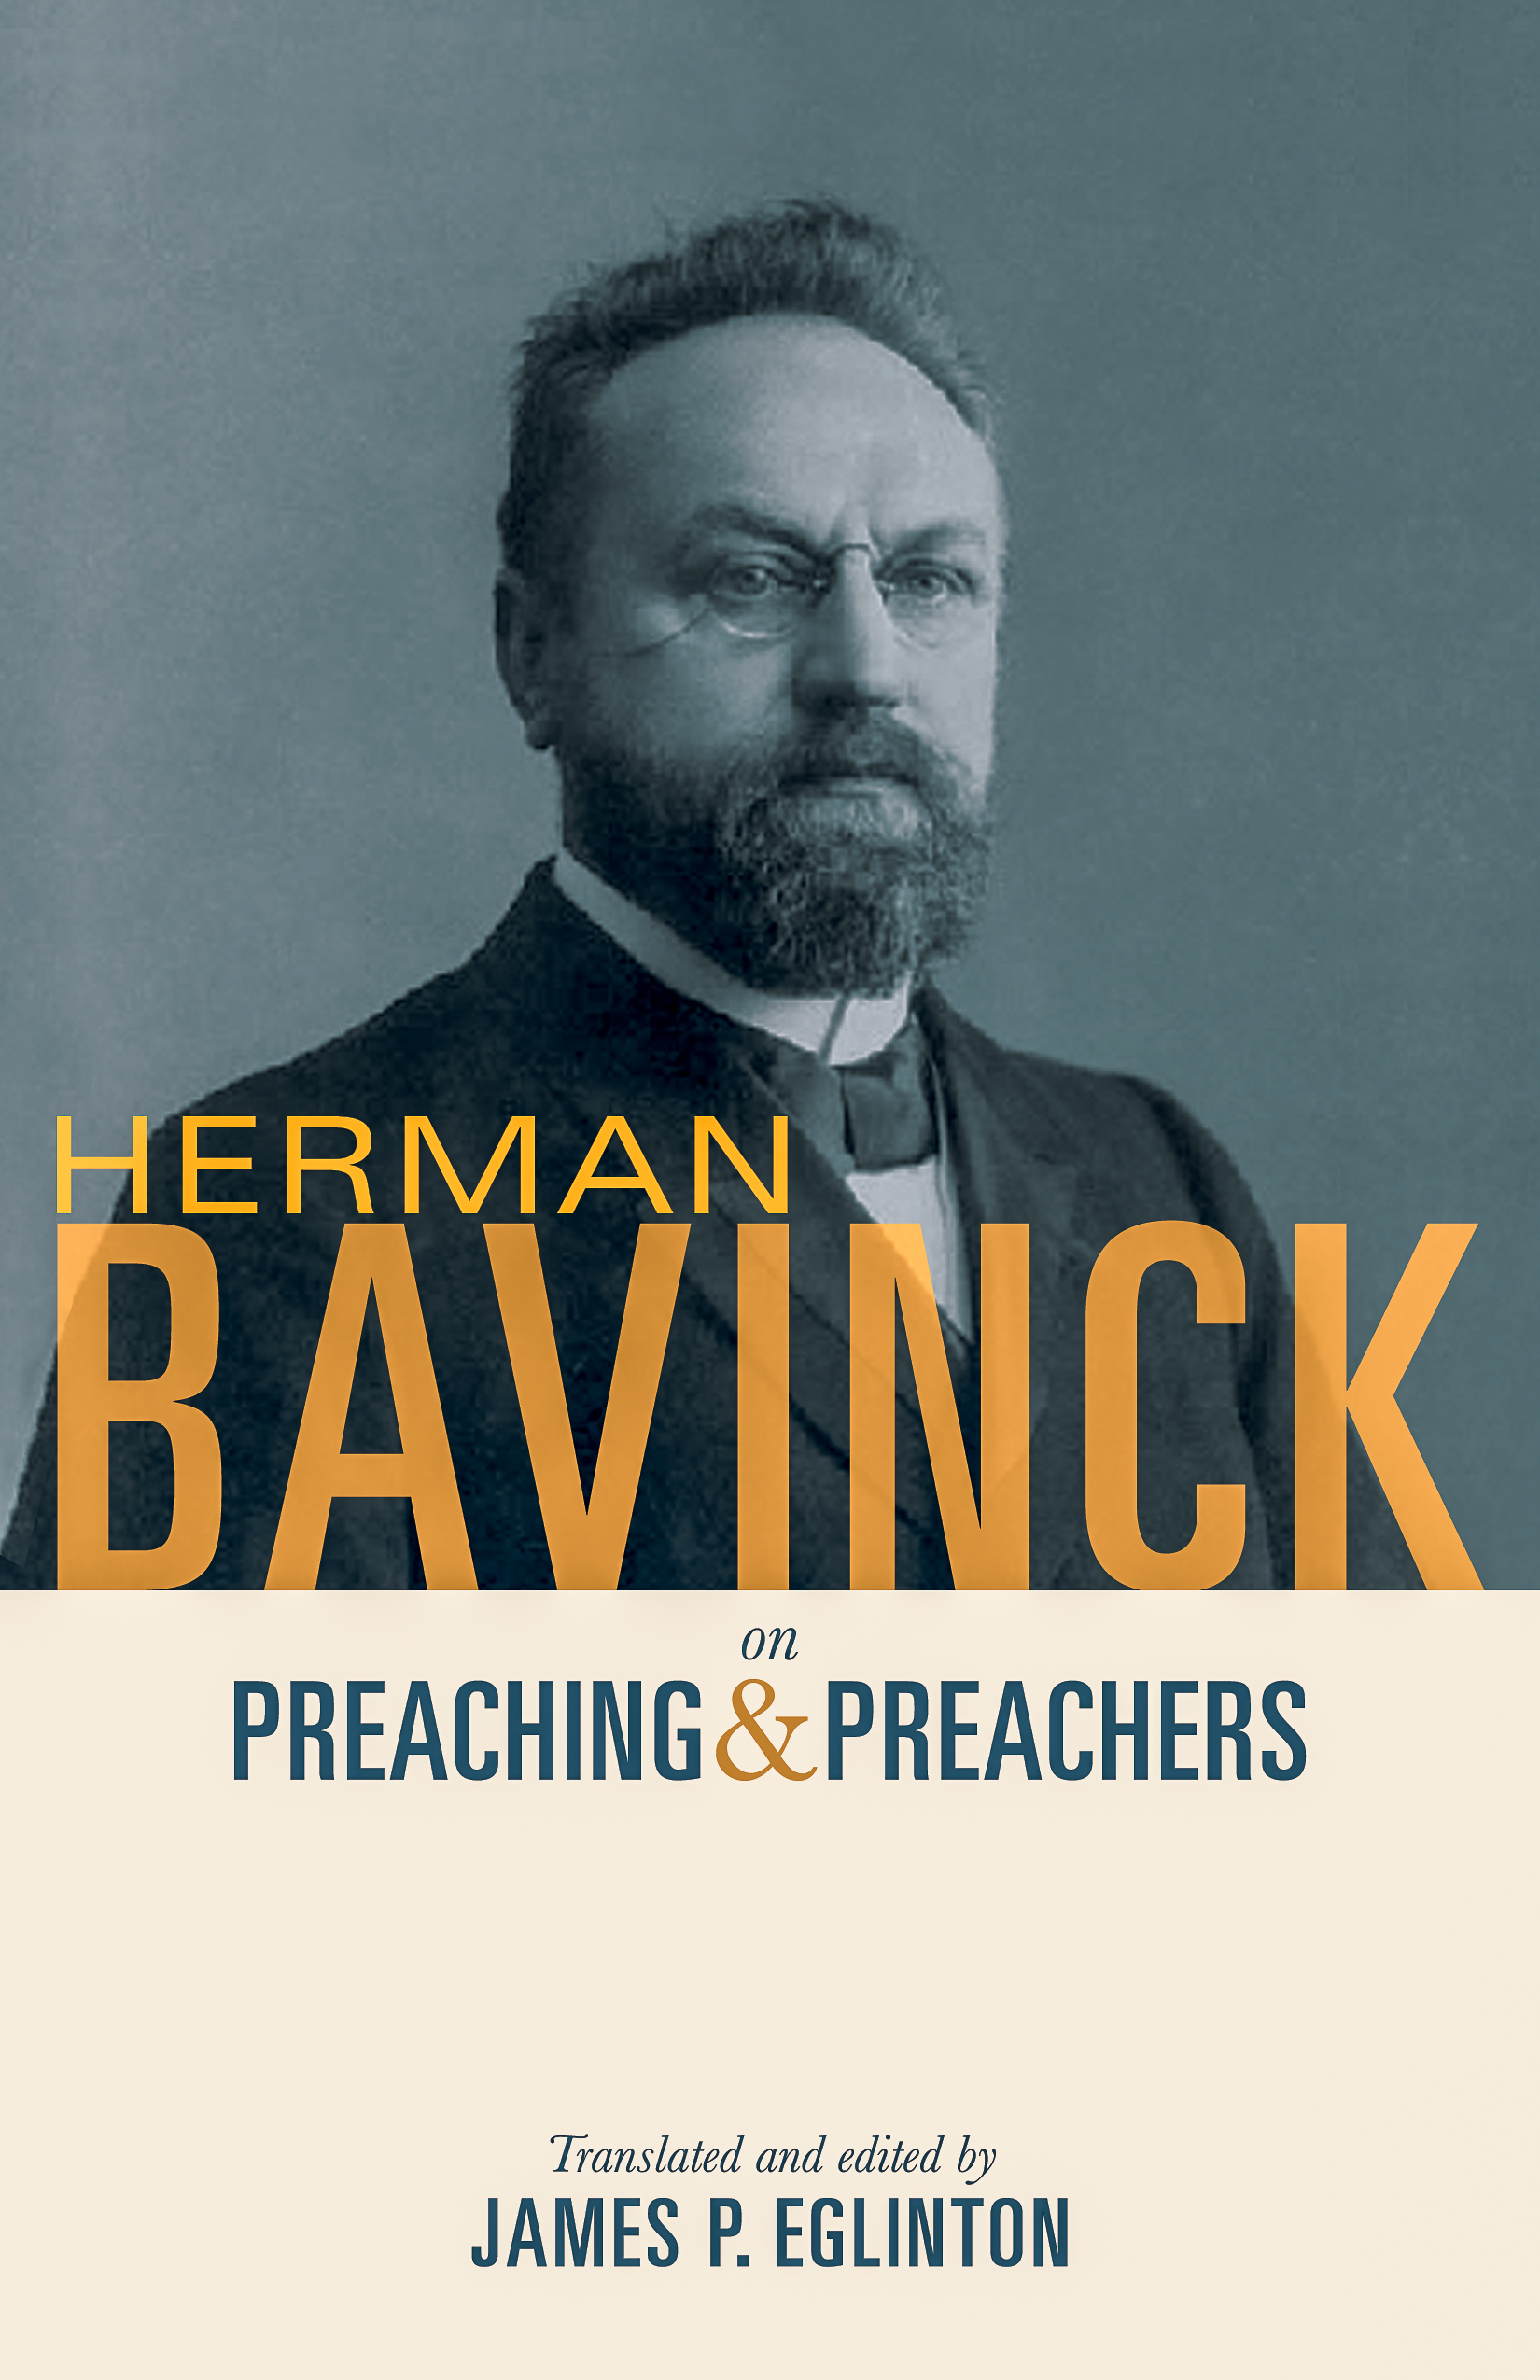 Contents Herman Bavinck on Preaching Preachers ebook edition 2017 by - photo 1